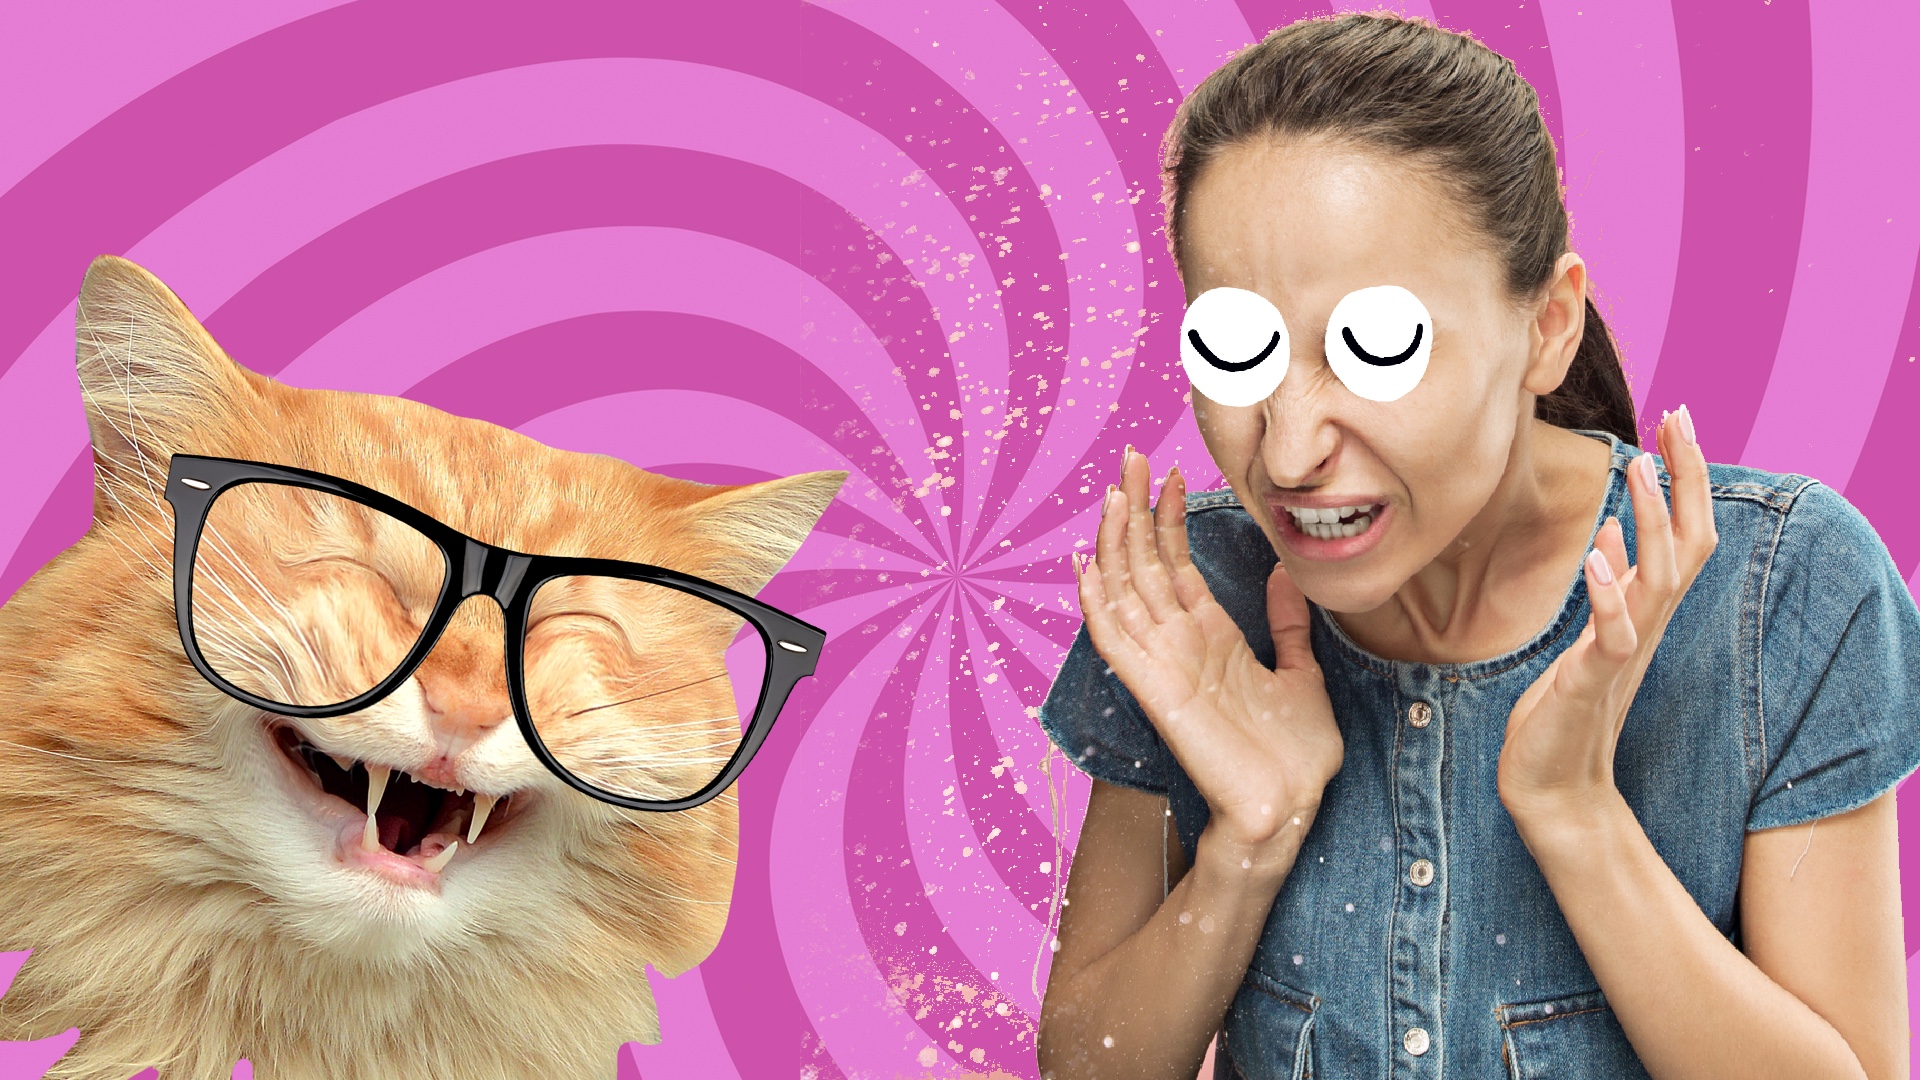 A person sneezing near a cat